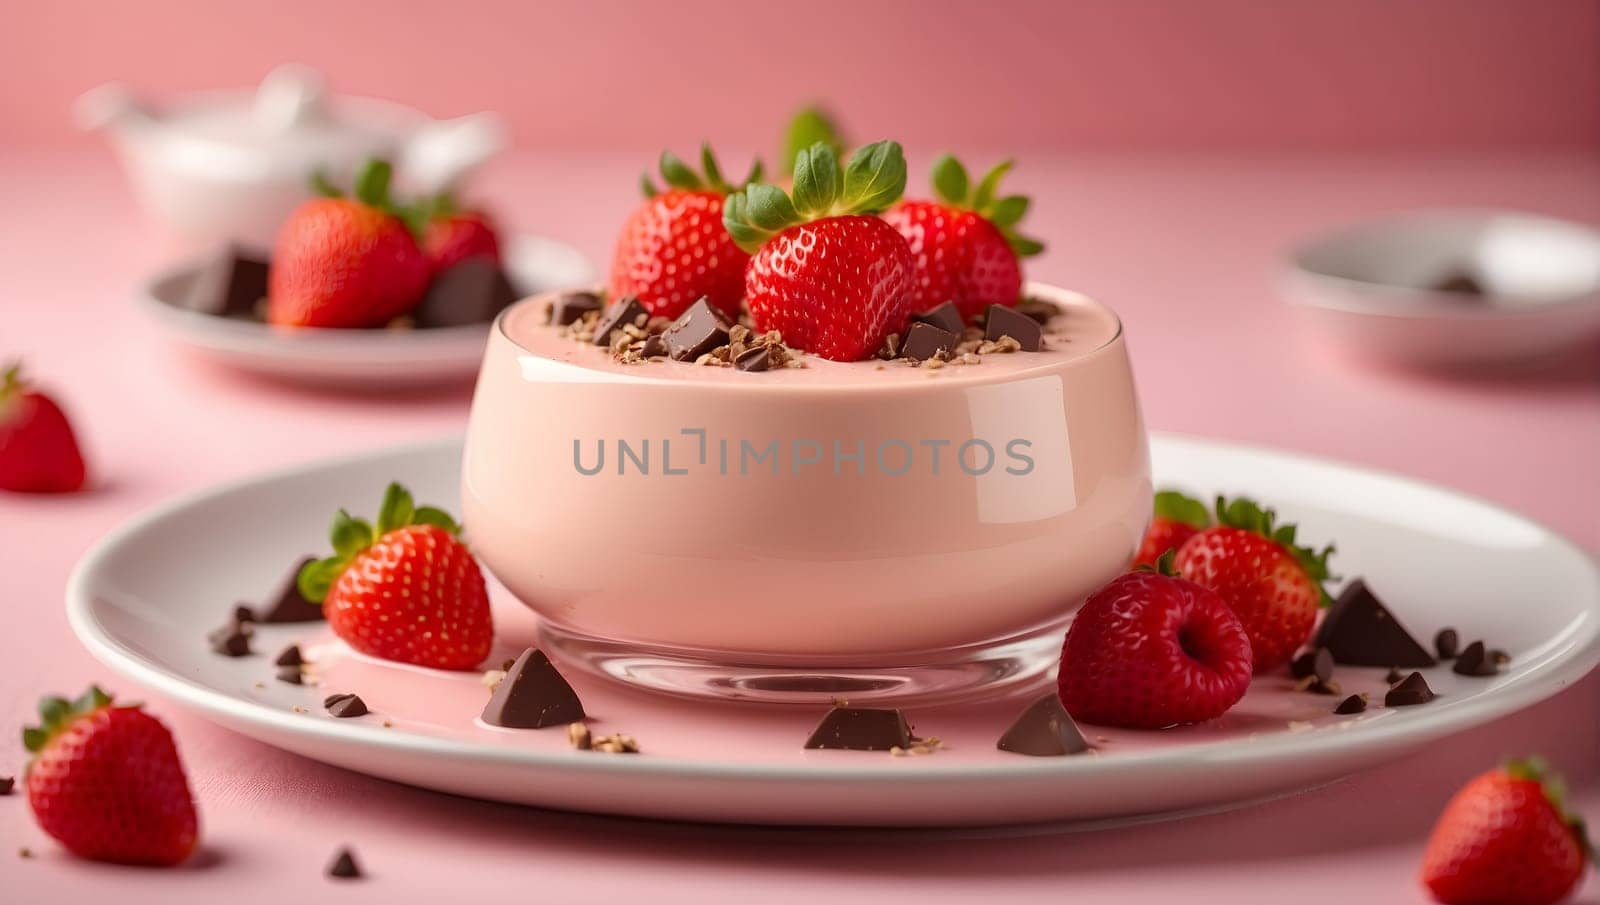 Panna cotta with strawberries and chocolate on a pastel pink background by Севостьянов